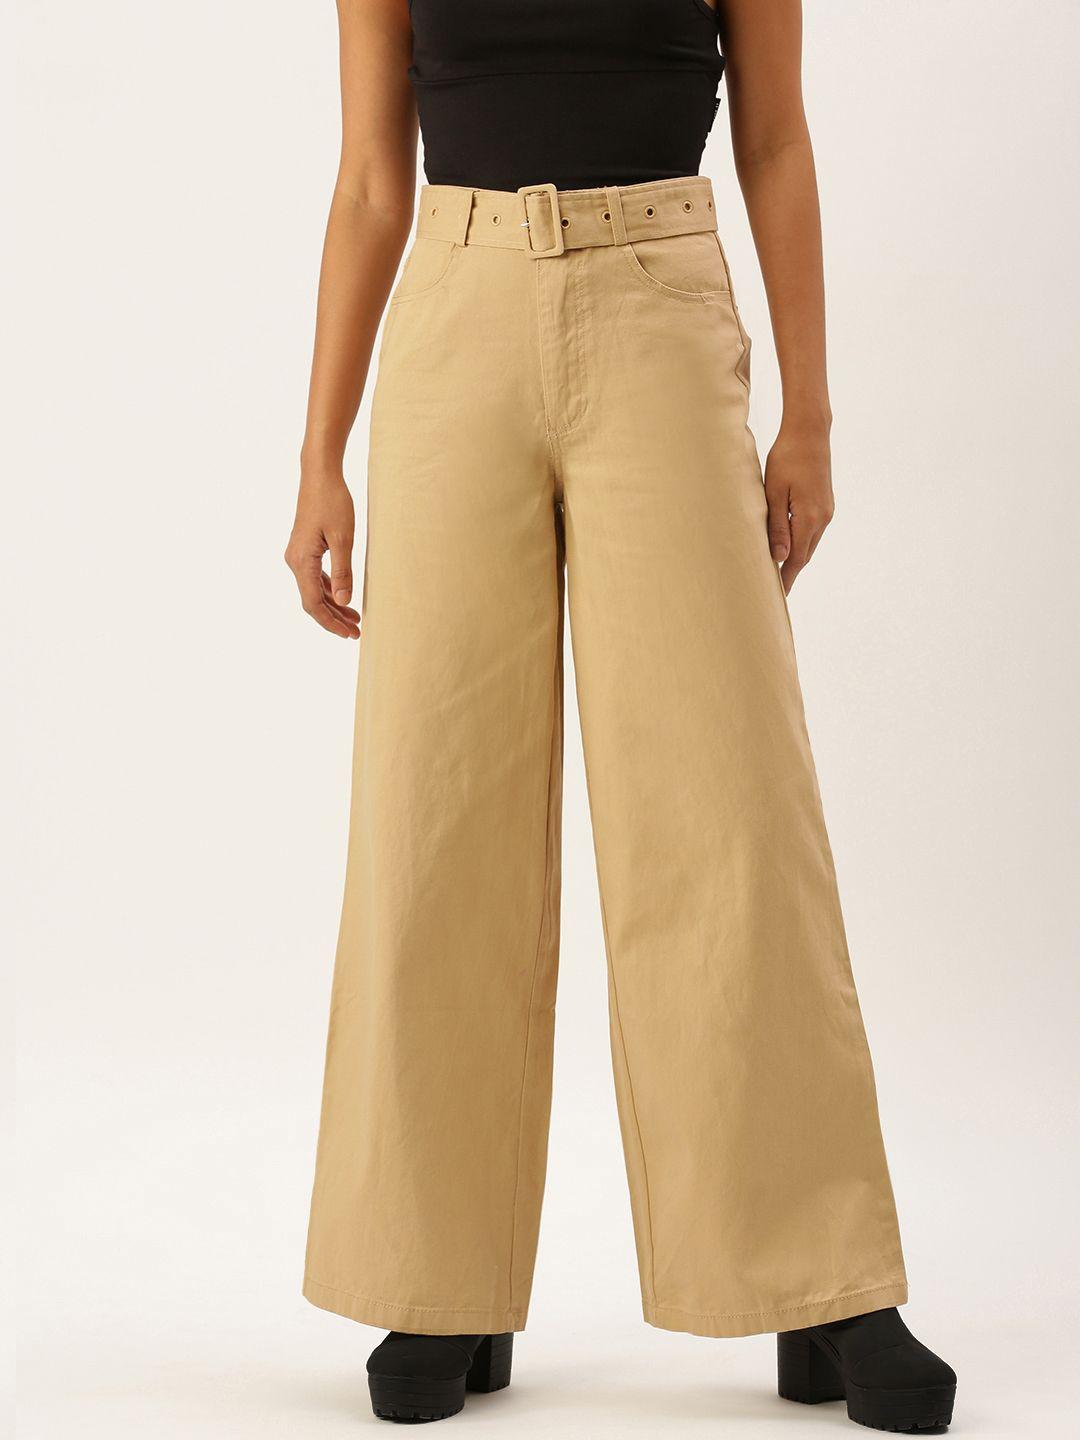 forever-21-women-beige-wide-leg-mid-rise-clean-look-jeans-with-a-belt